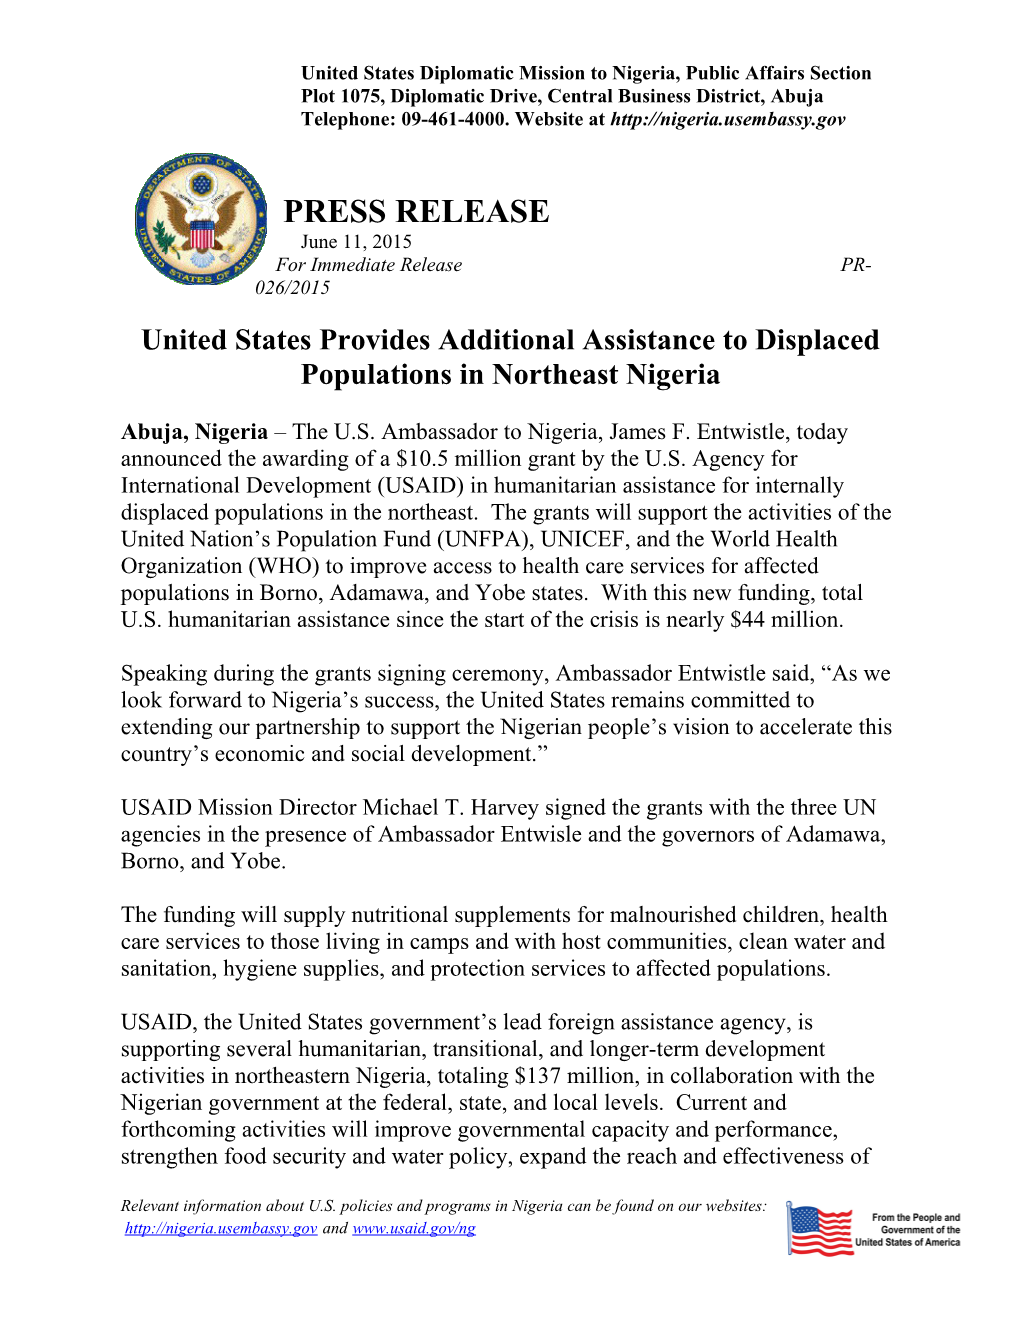 United States Provides Additional Assistance to Displaced